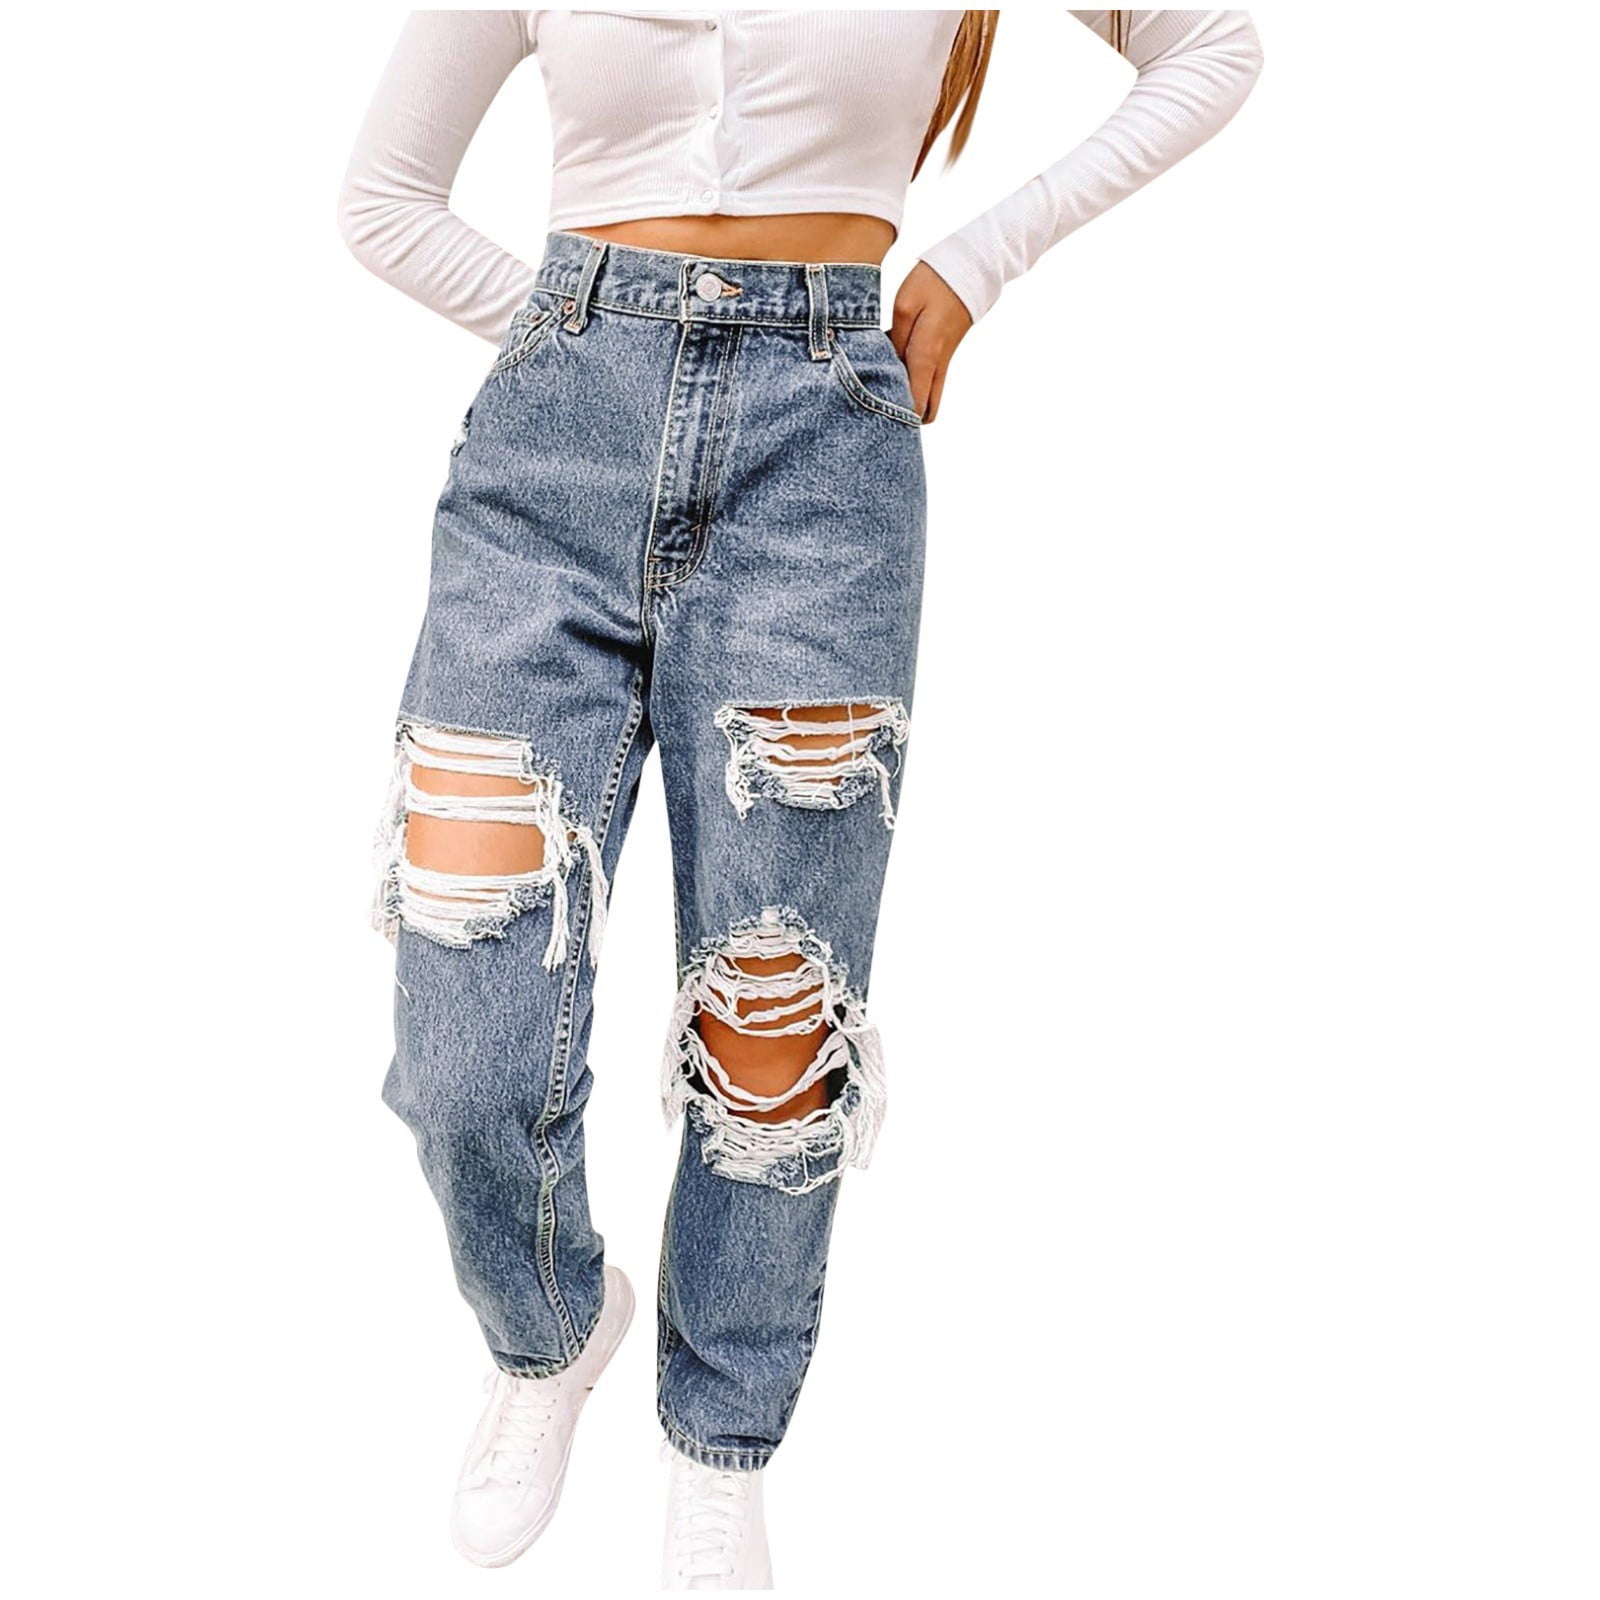 pants for women high waisted baggy ripped jeans fashion large denim pocket  elastic jeans 